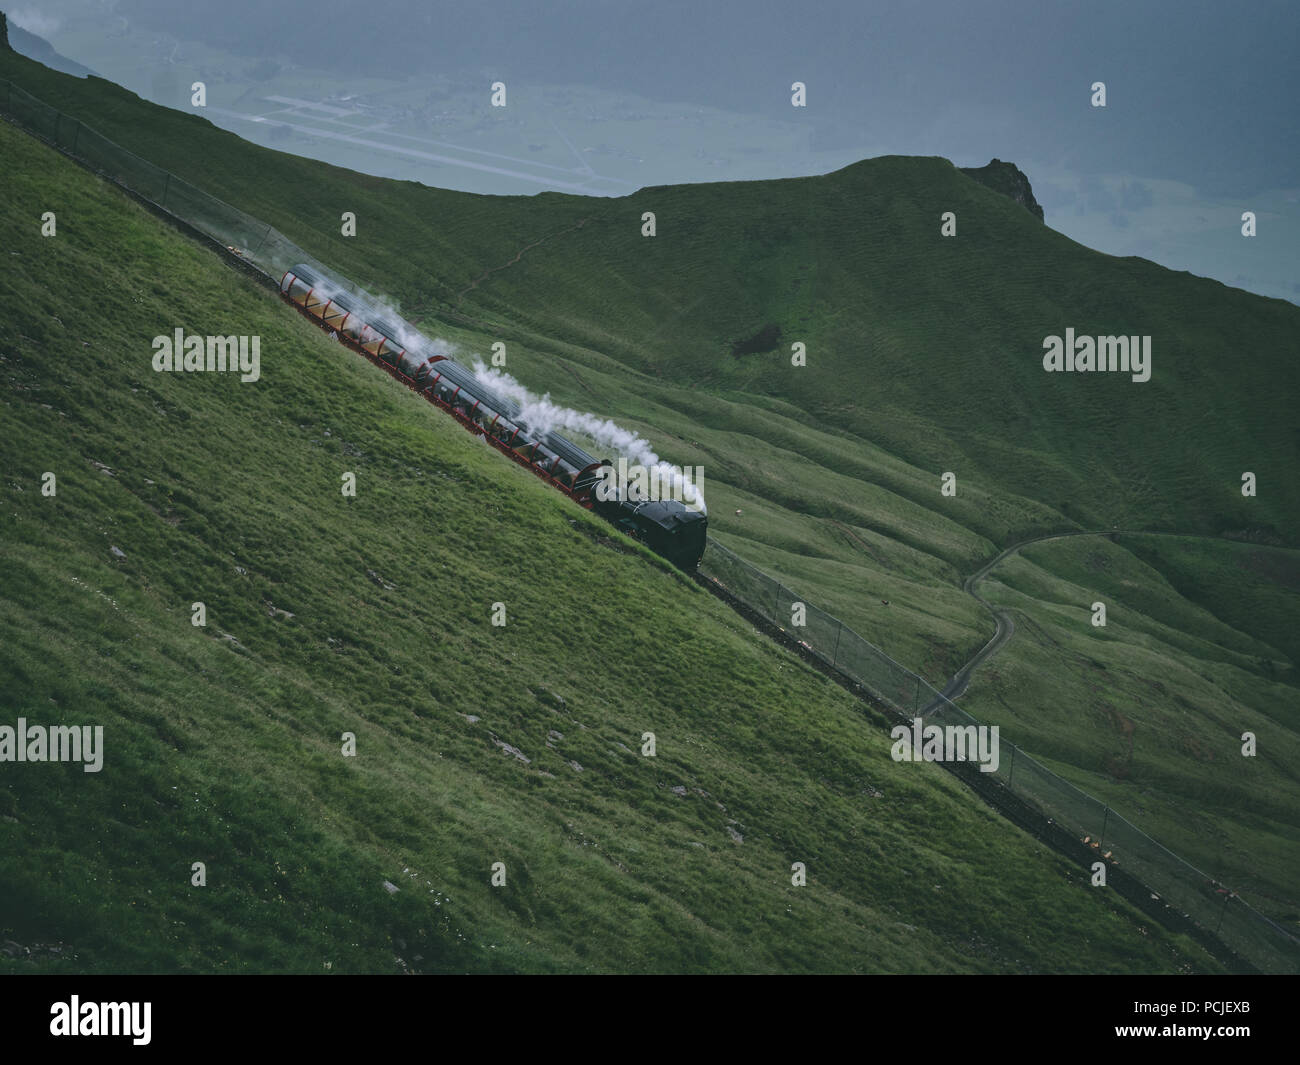 old steam train on a mountain track in the swiss alps, brienzer rothorn bahn in switzerland Stock Photo